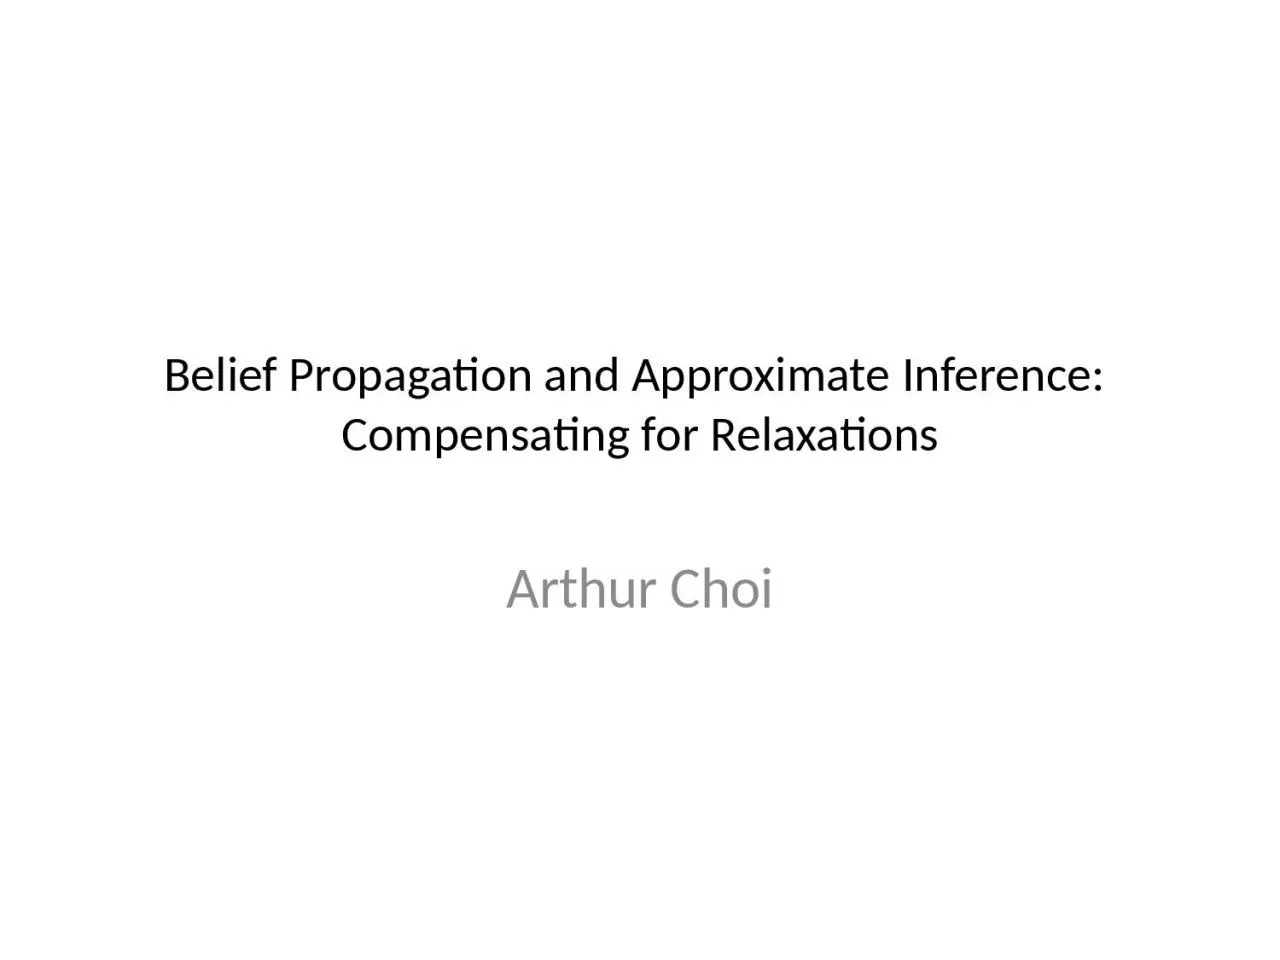 Belief Propagation and Approximate Inference: